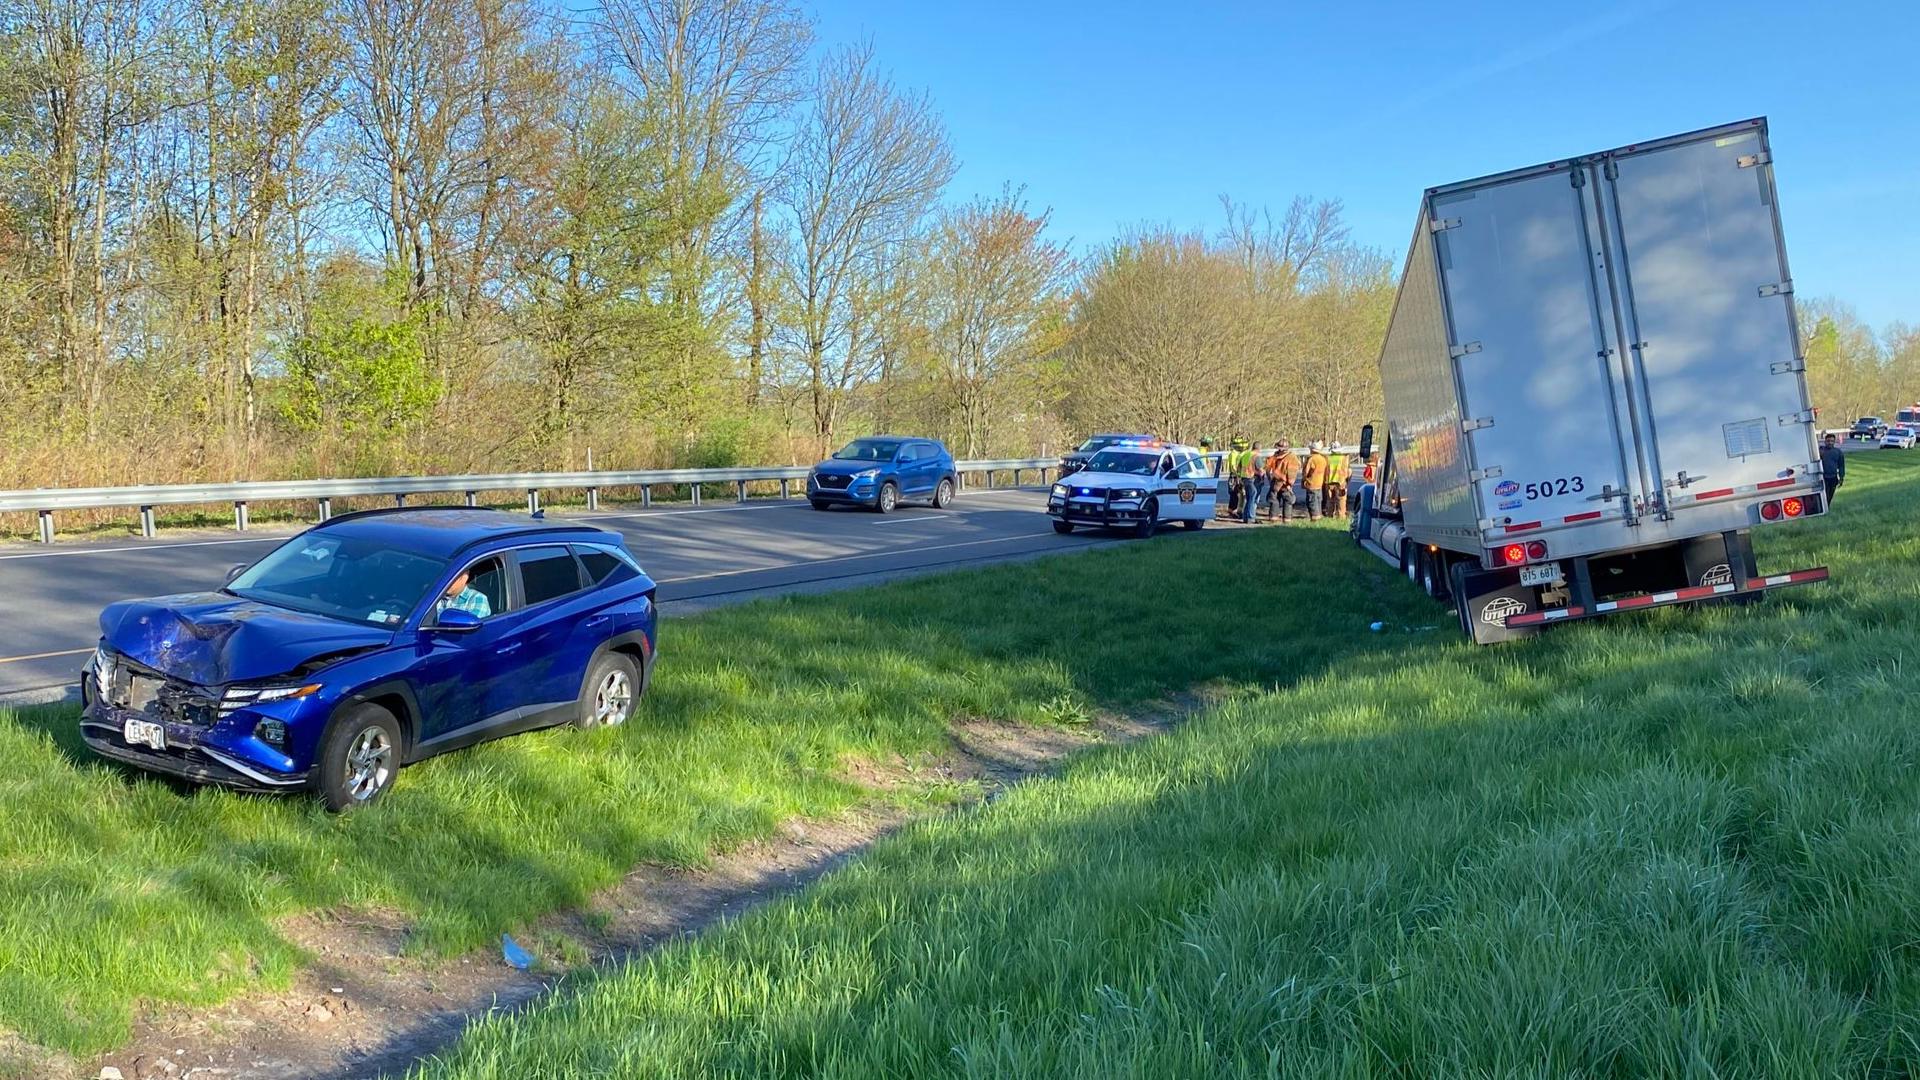 Two tractor-trailers and one car were involved in a crash on I-81 near Lenoxville on Thursday afternoon.